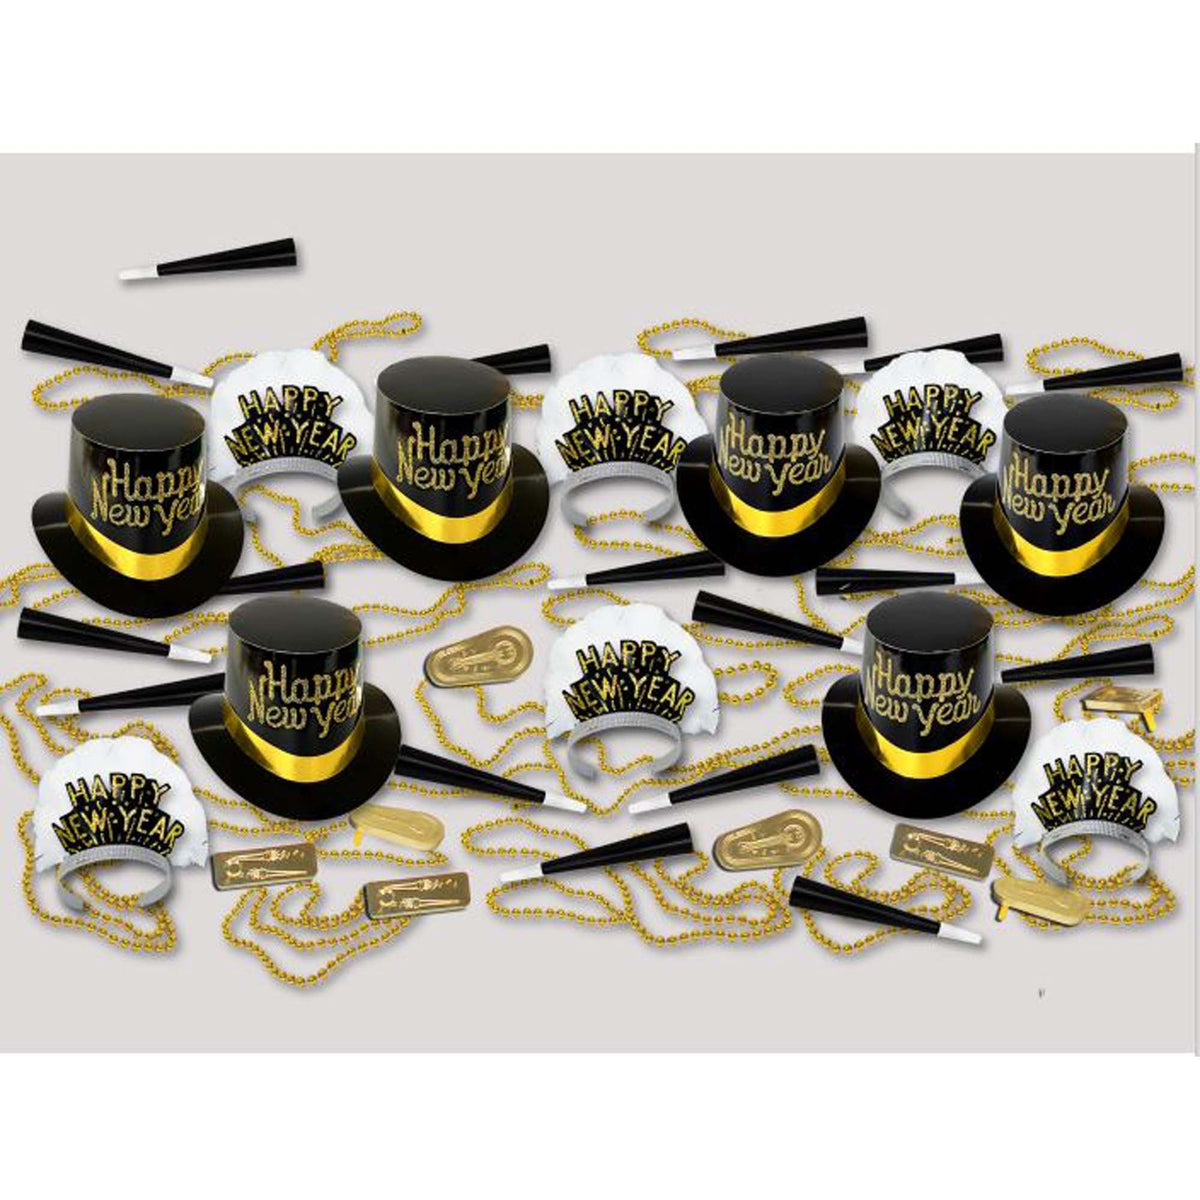 PARTY TIME MFG New Year Happy New Year Royal Party Kit for 50 People, 1 Count 010372338007